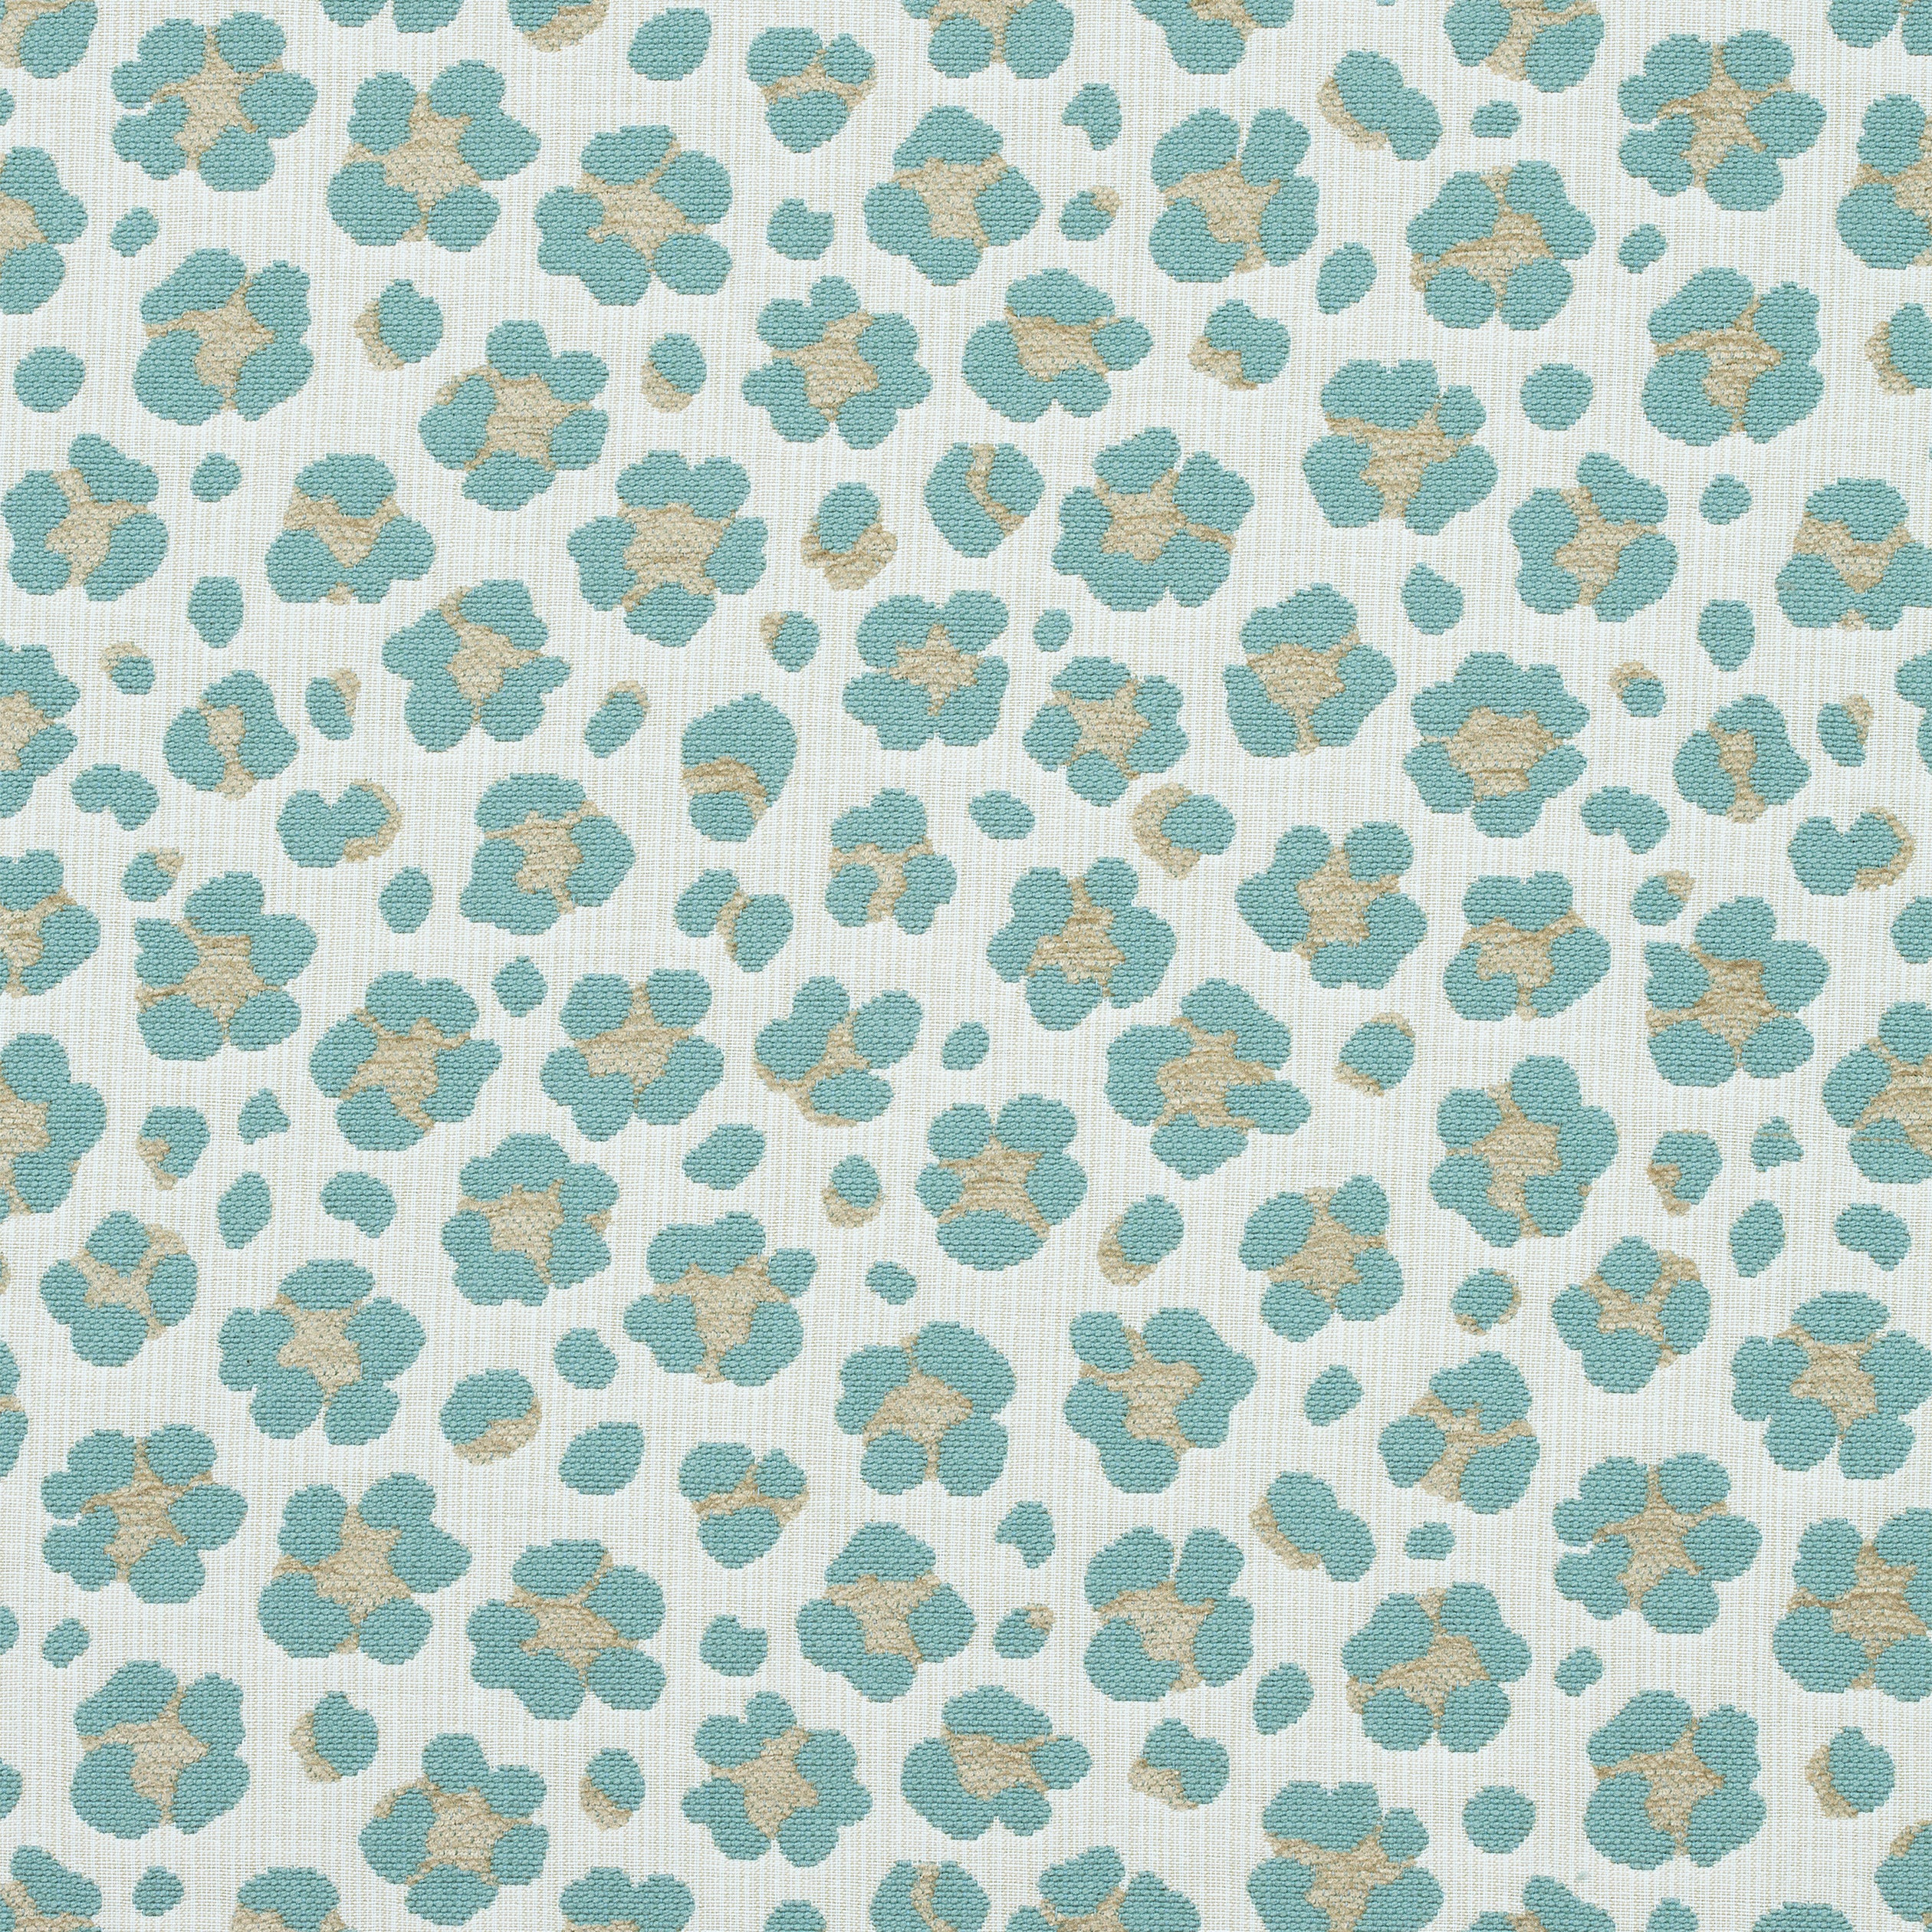 Trixie fabric in linen on aqua color - pattern number W80417 - by Thibaut in the Woven Resource Vol 10 Menagerie collection